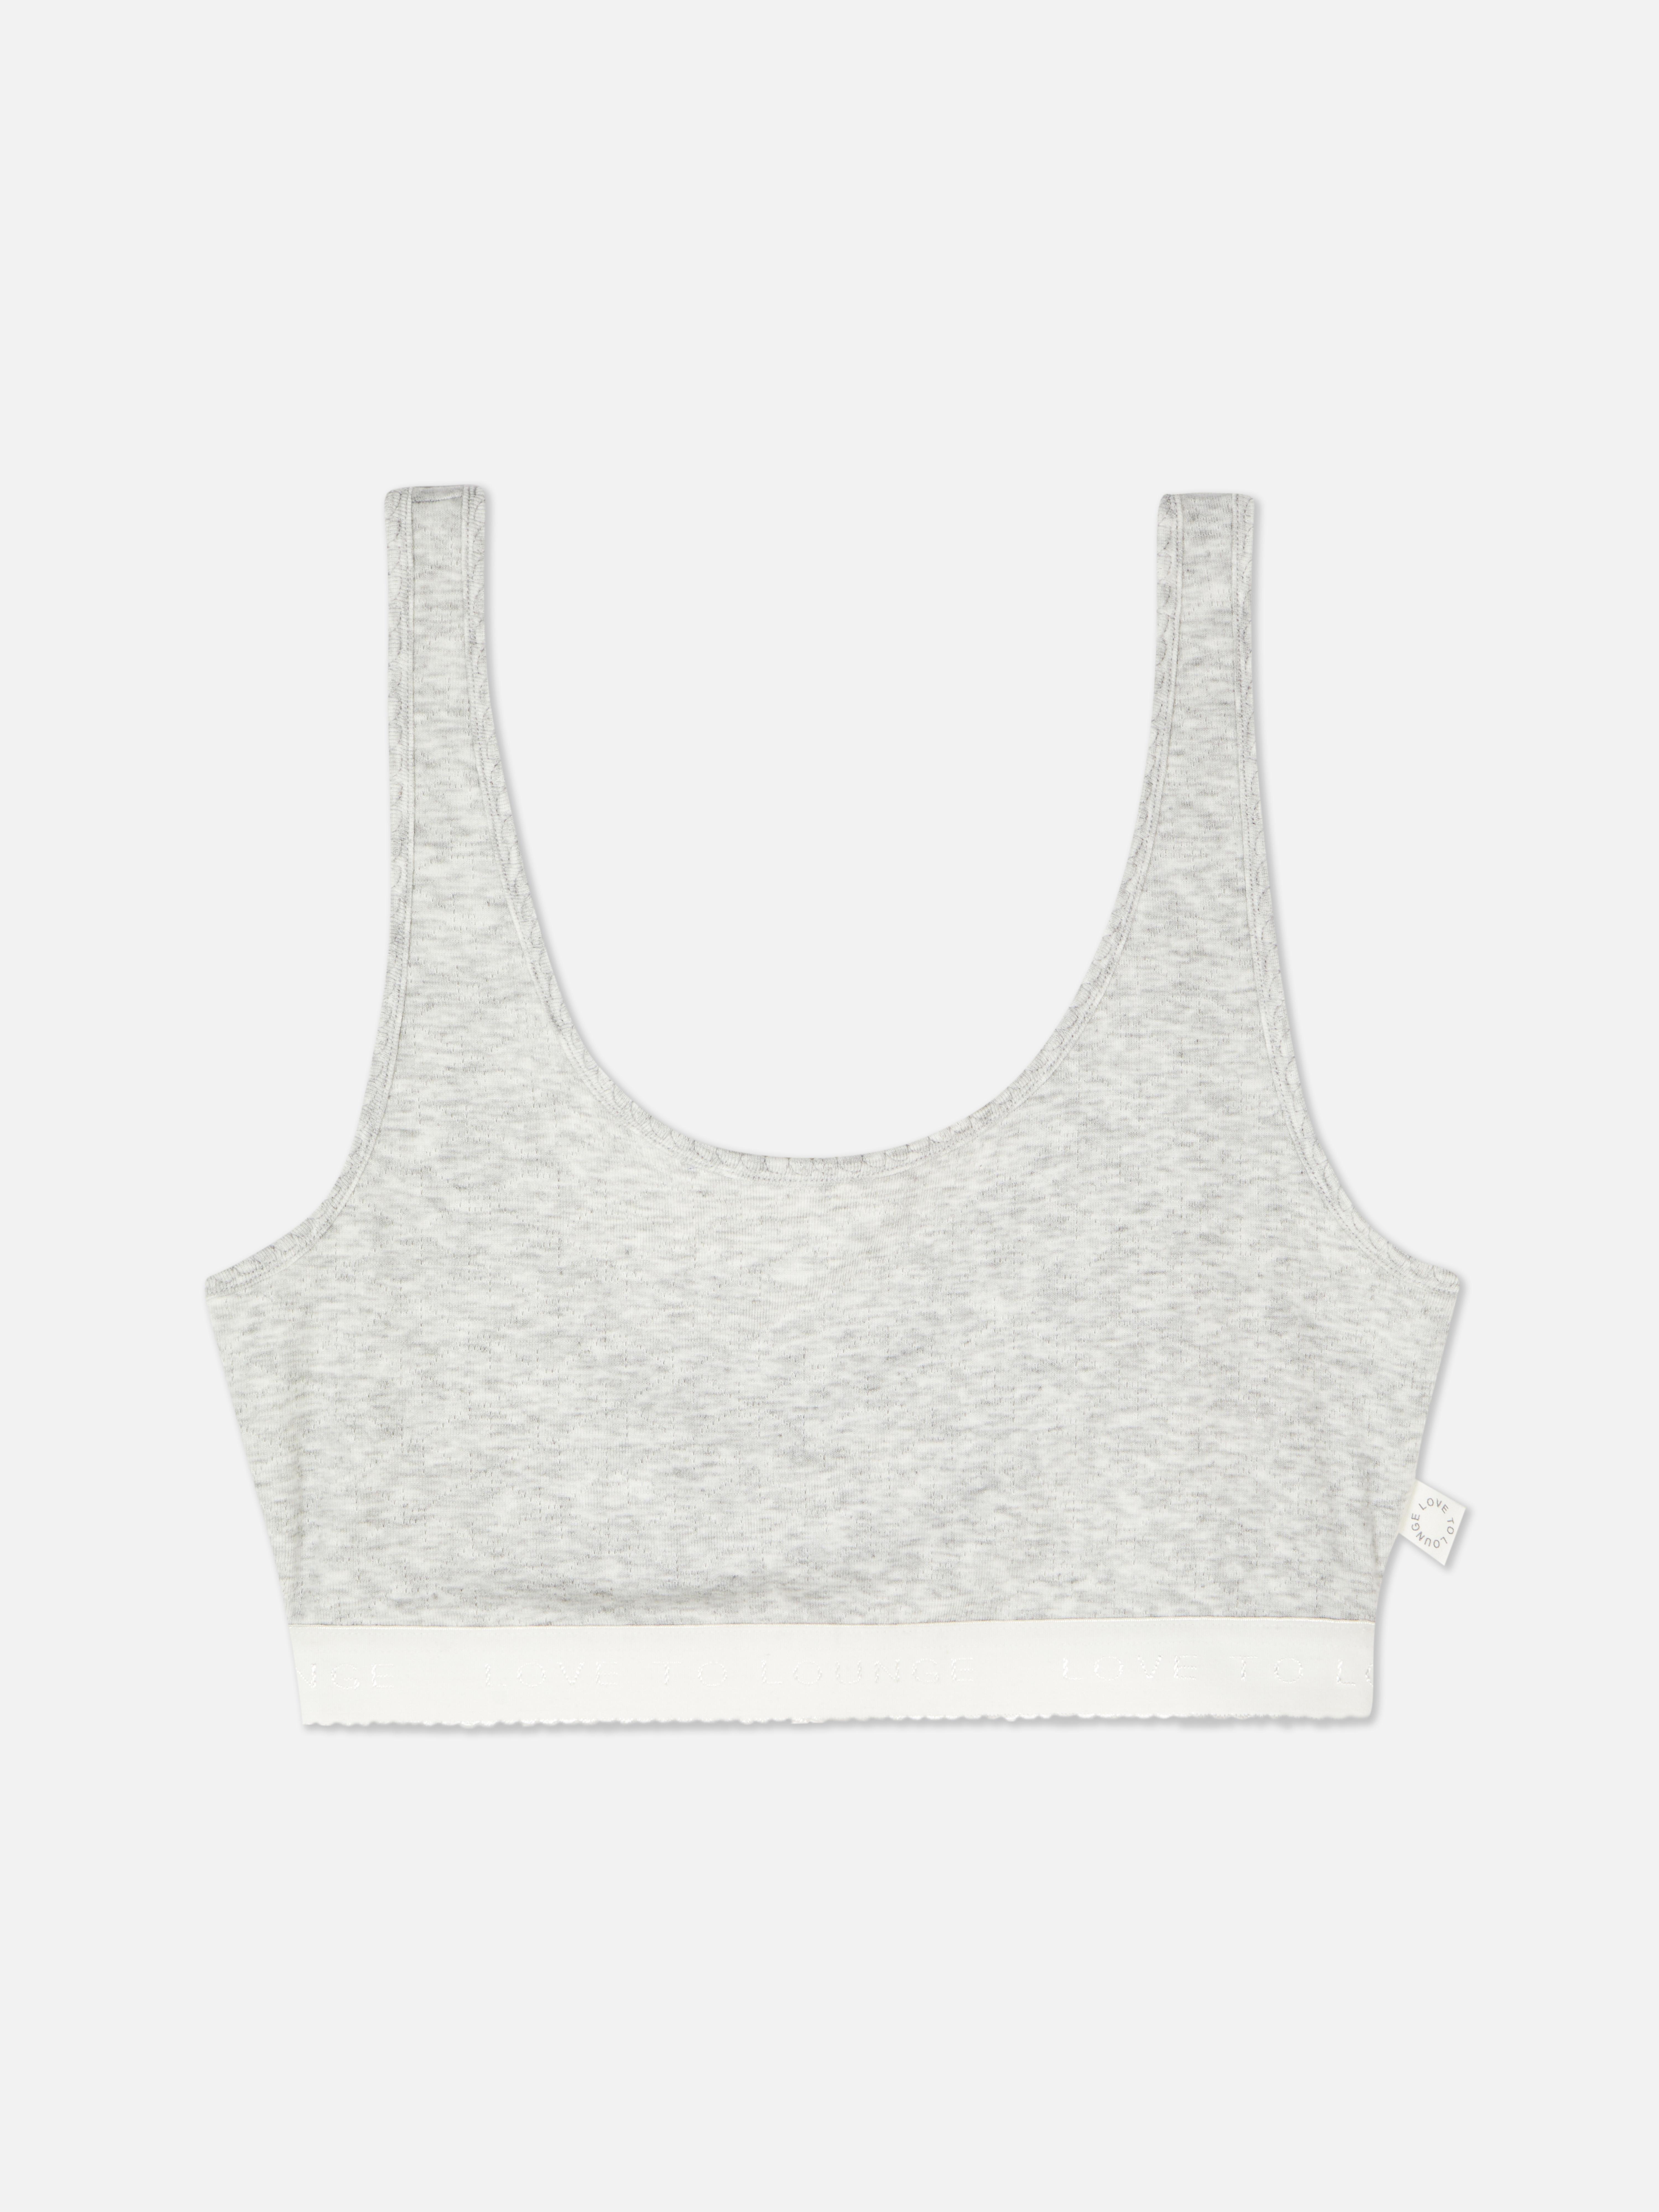 Out From Under - Miranda Pointelle Bralette in Grey, Women's at